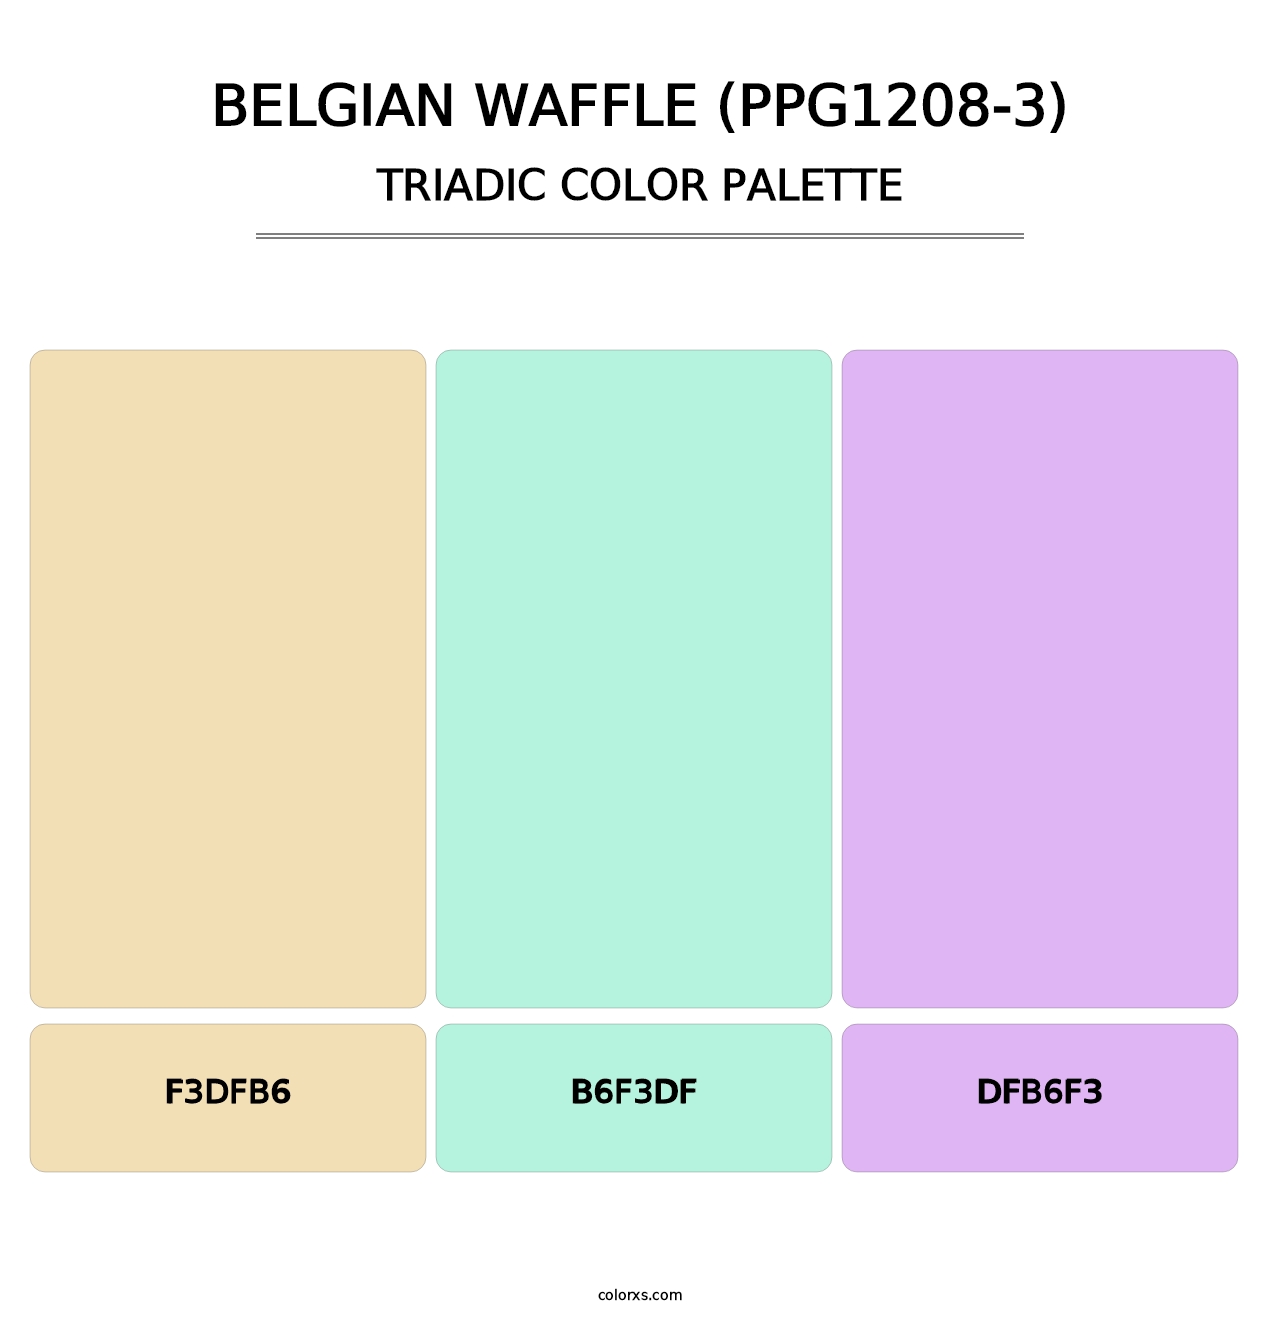 Belgian Waffle (PPG1208-3) - Triadic Color Palette